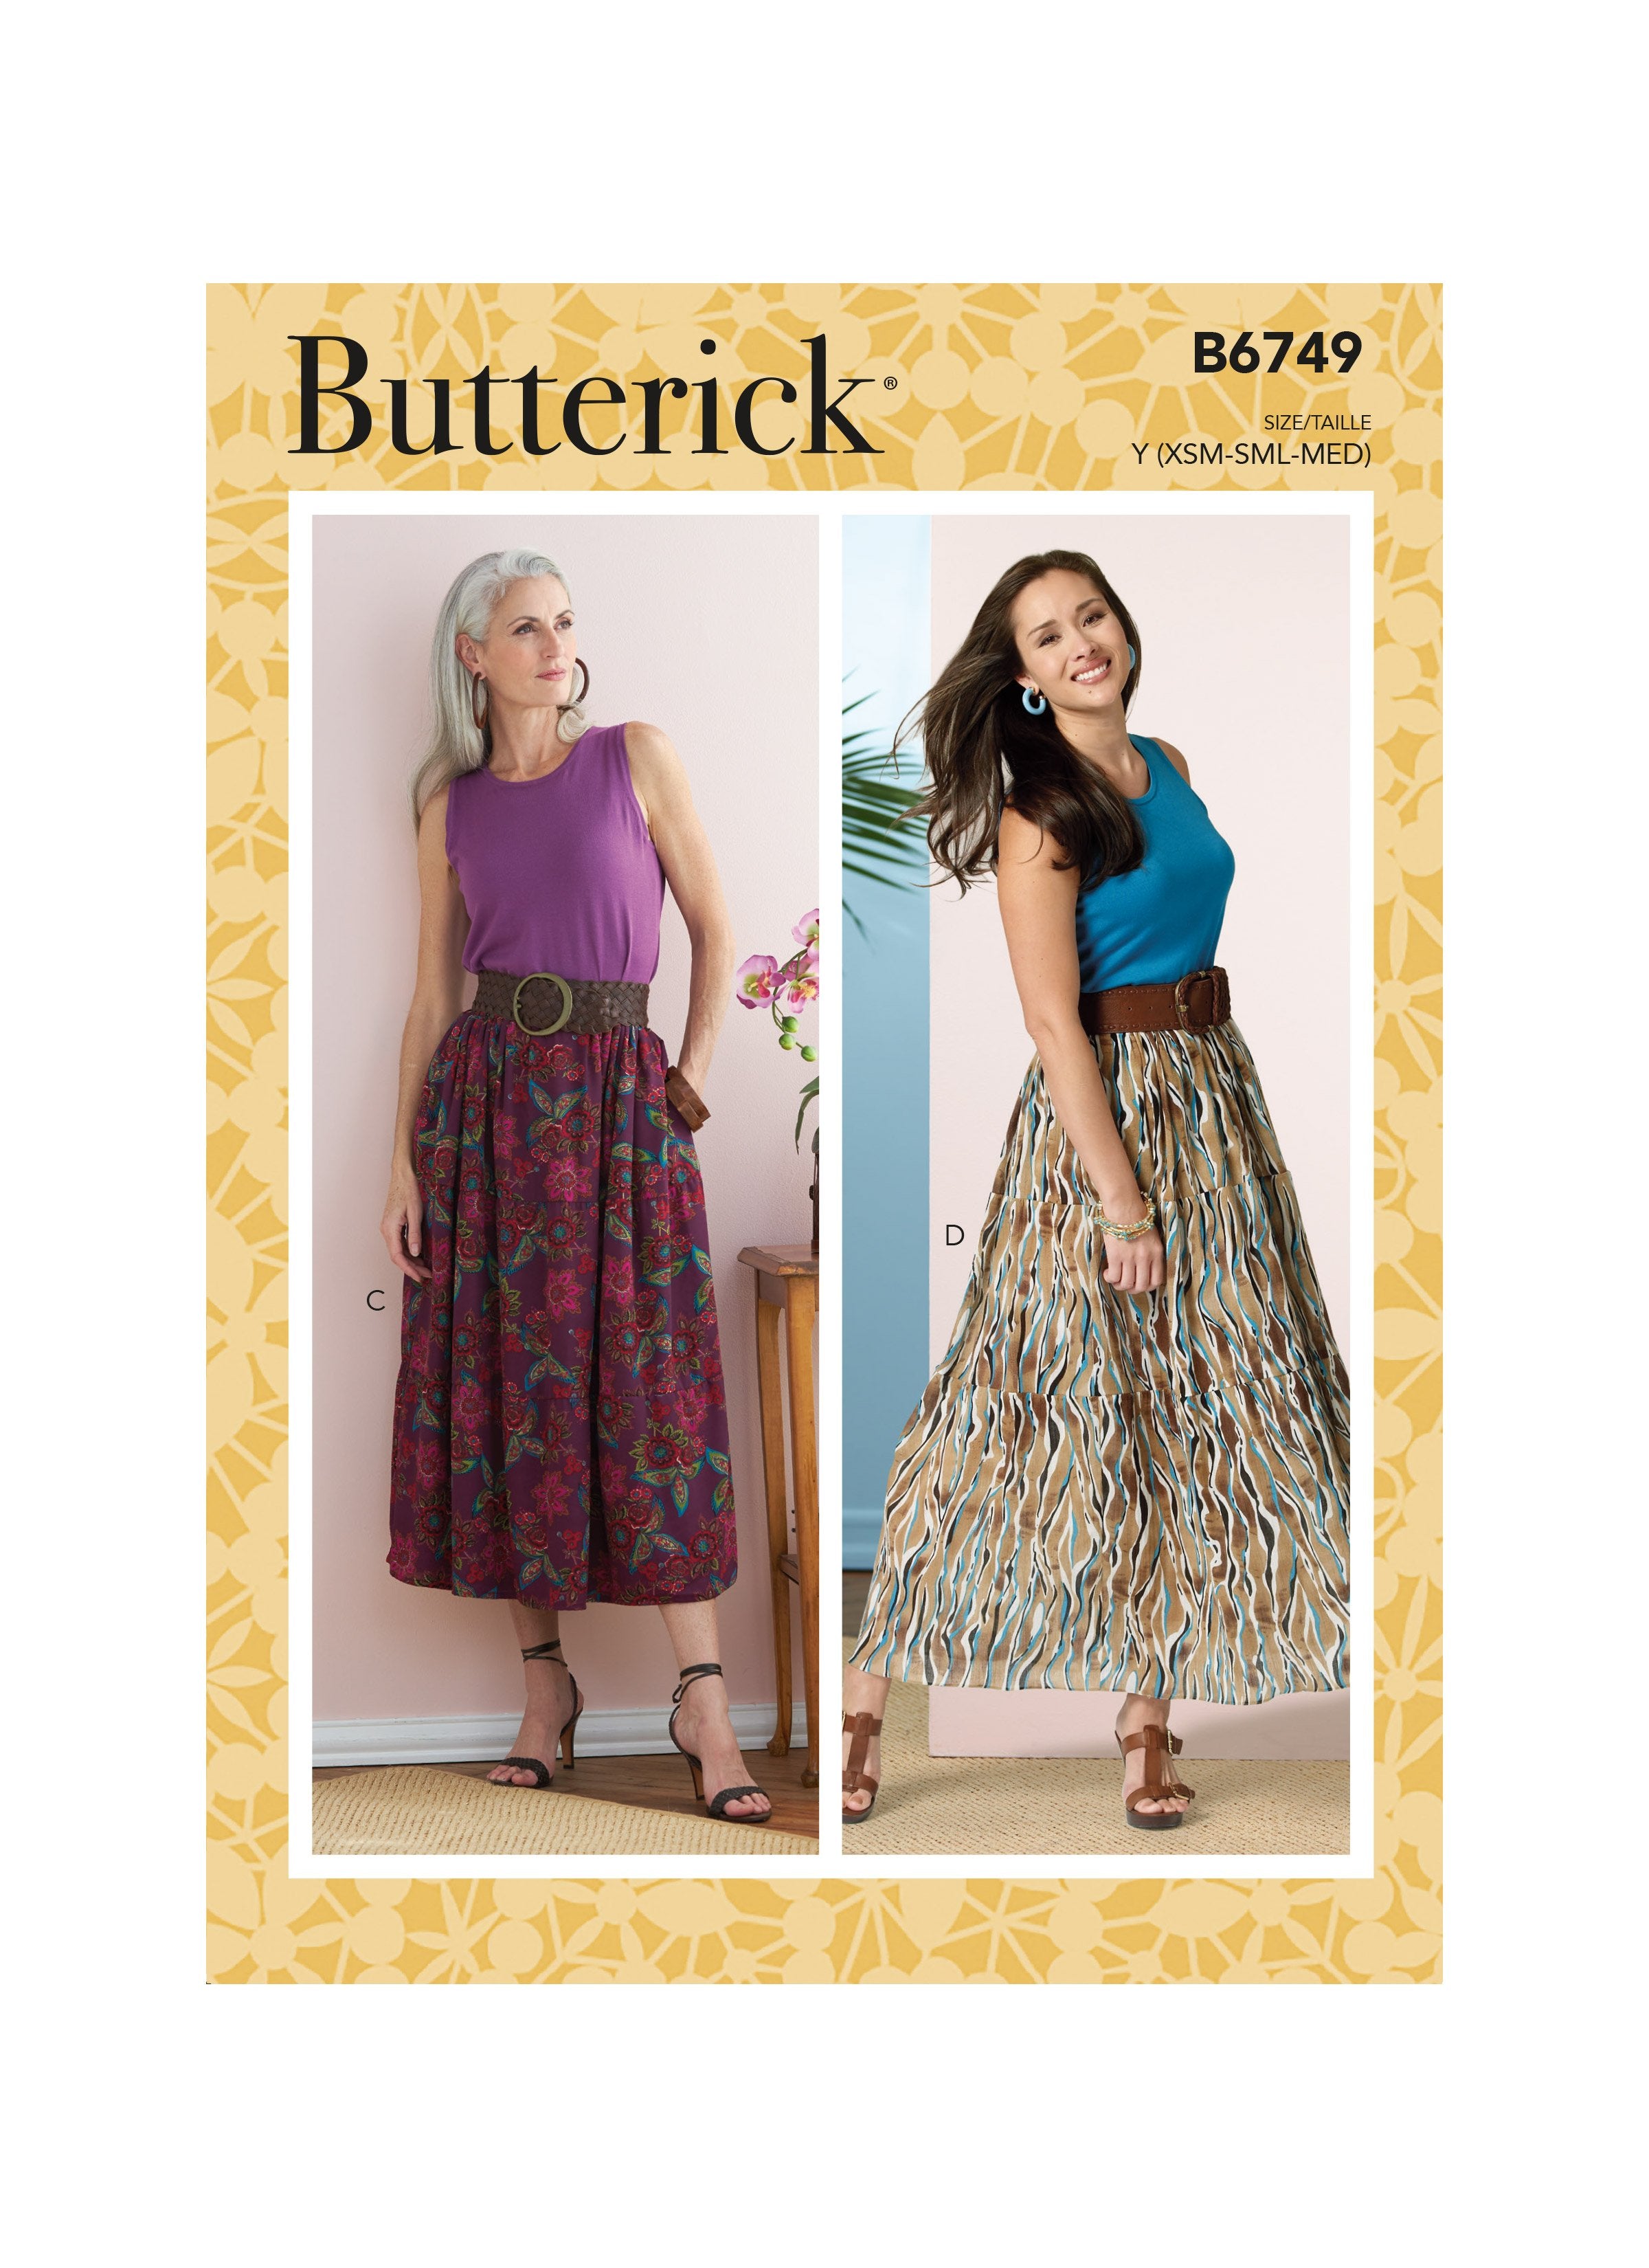 Butterick Sewing Pattern 6749 Misses' Gathered-Waist Skirts from Jaycotts Sewing Supplies